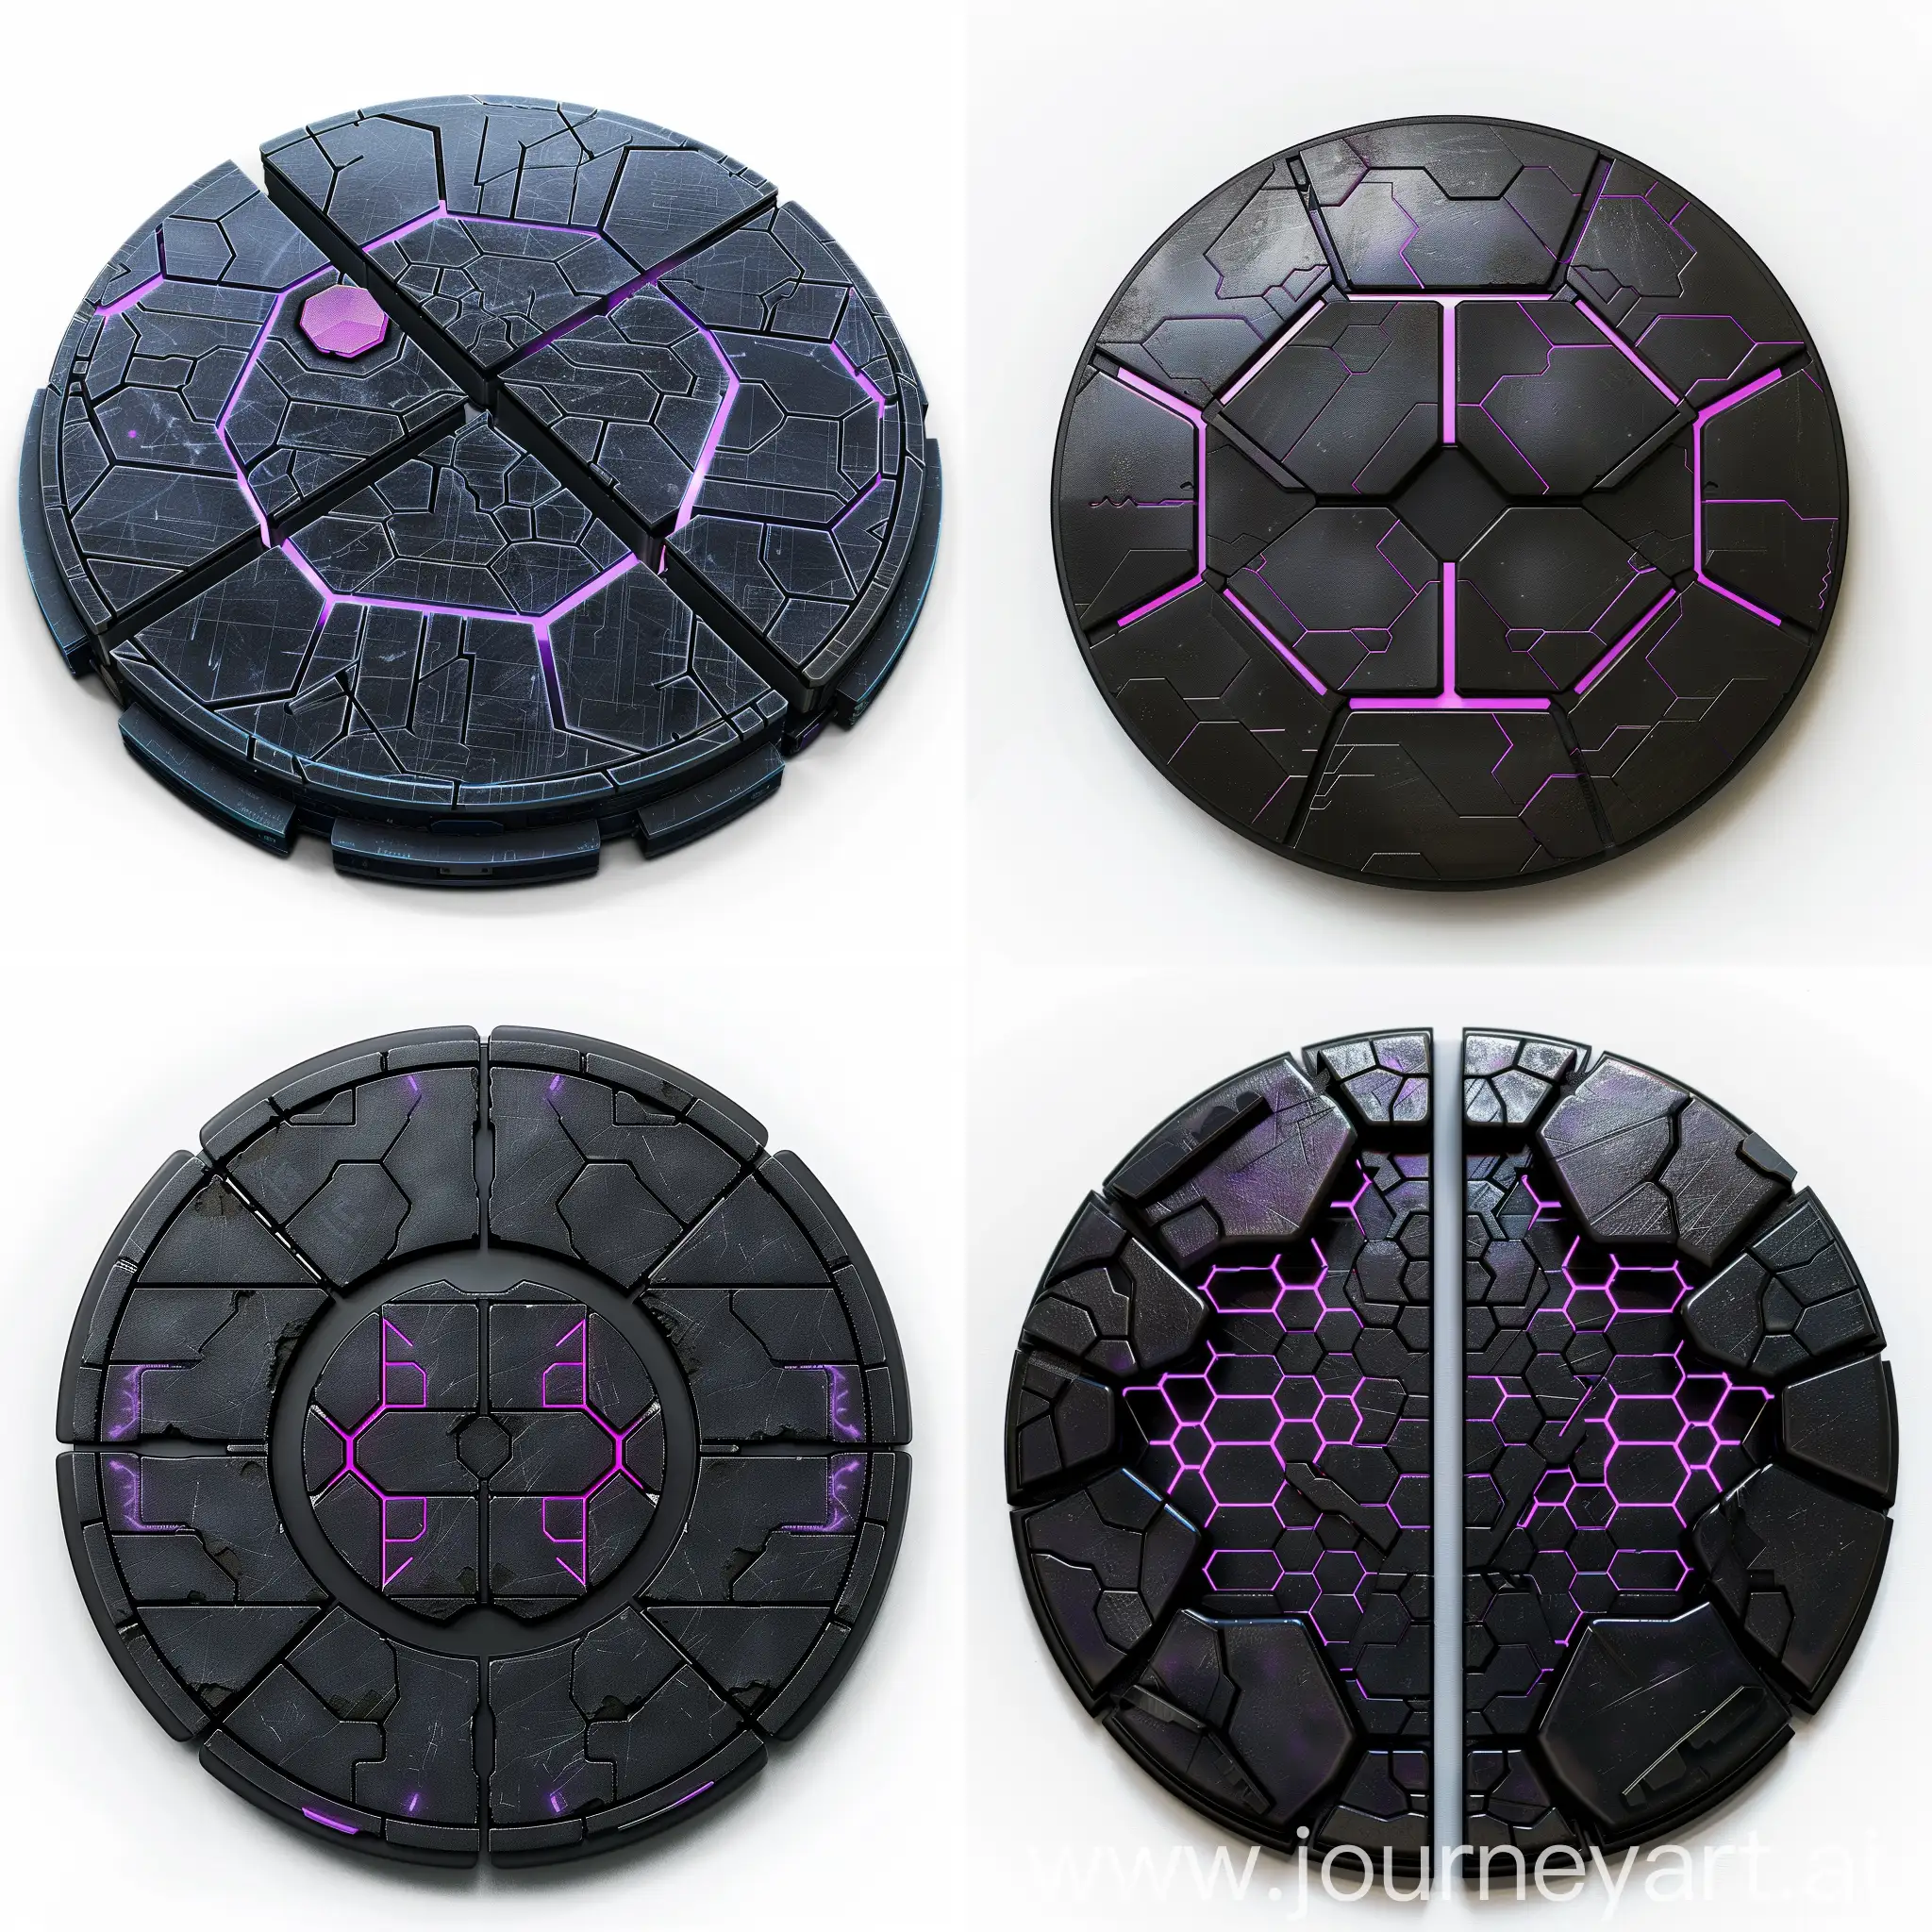 Futuristic-Cyberpunk-Robotic-Coin-with-Neon-Purple-Hexagon-Patterns-on-Clean-White-Background